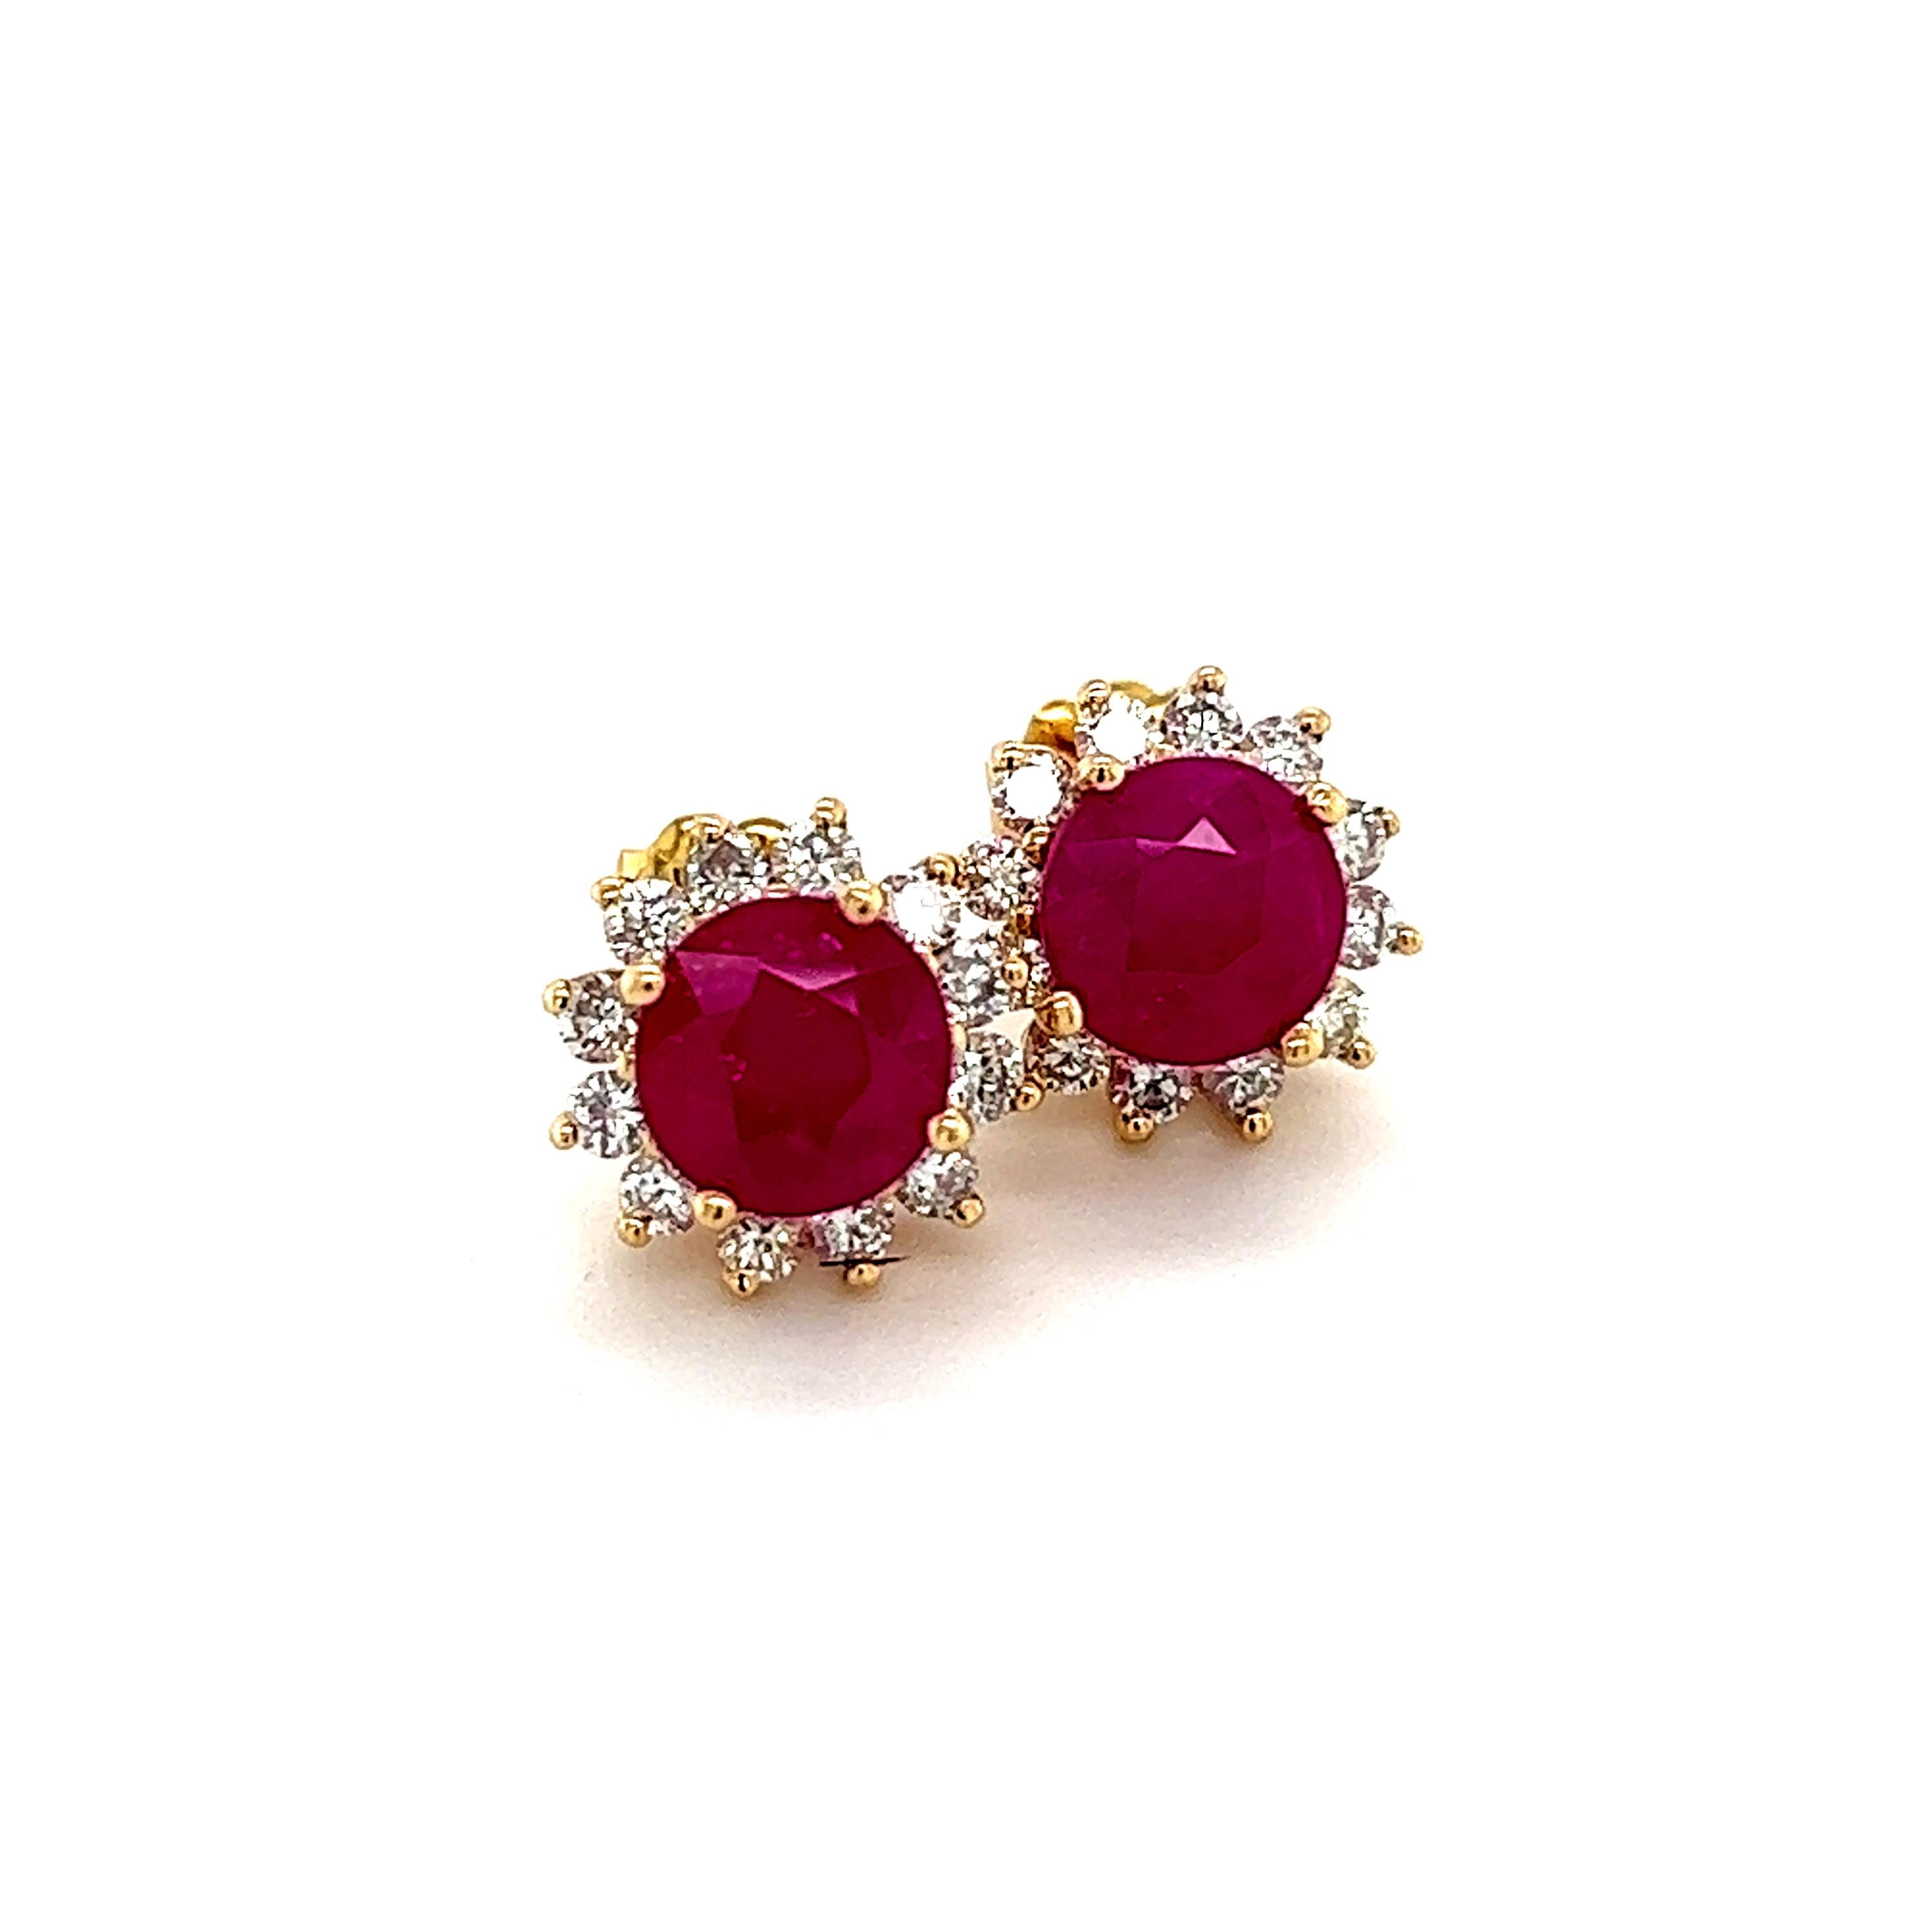 Natural Ruby Diamond Earrings 14k Gold 3.72 TCW Certified In New Condition For Sale In Brooklyn, NY